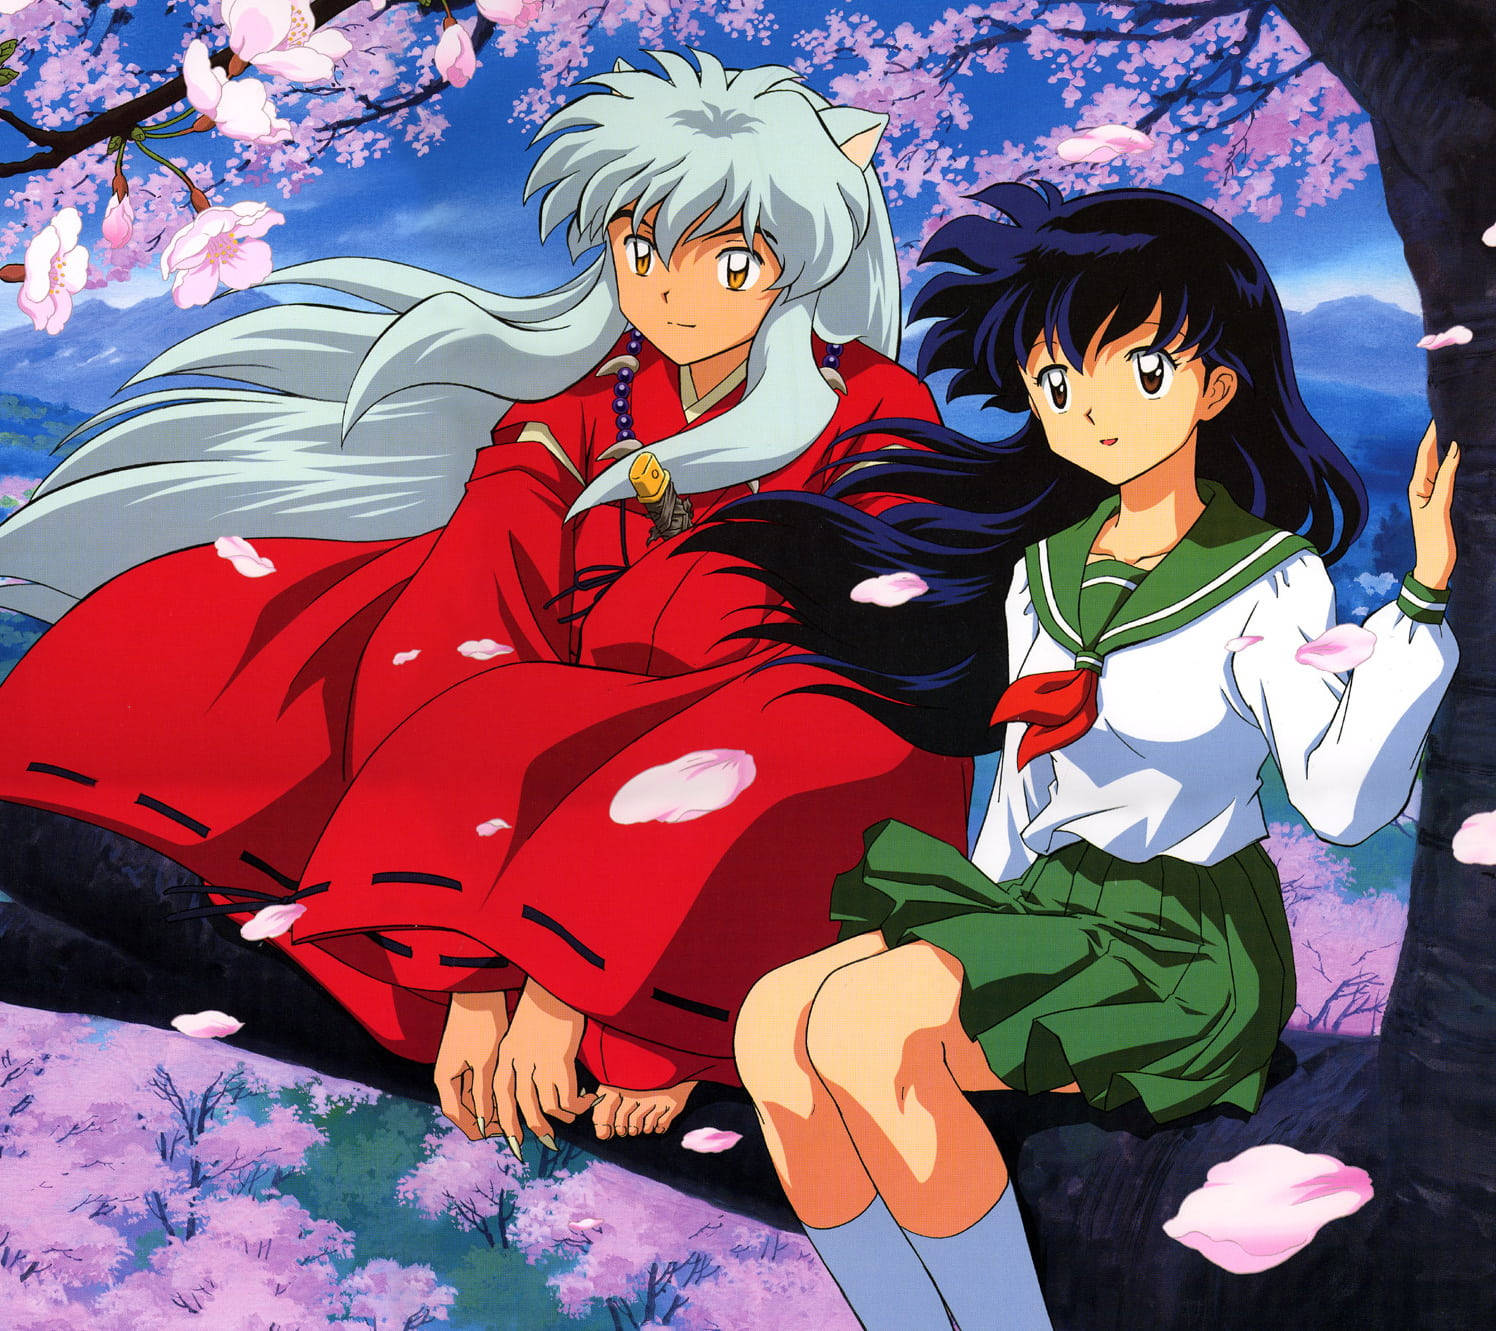 Inuyasha Watch Order How To Watch Inuyasha in Order